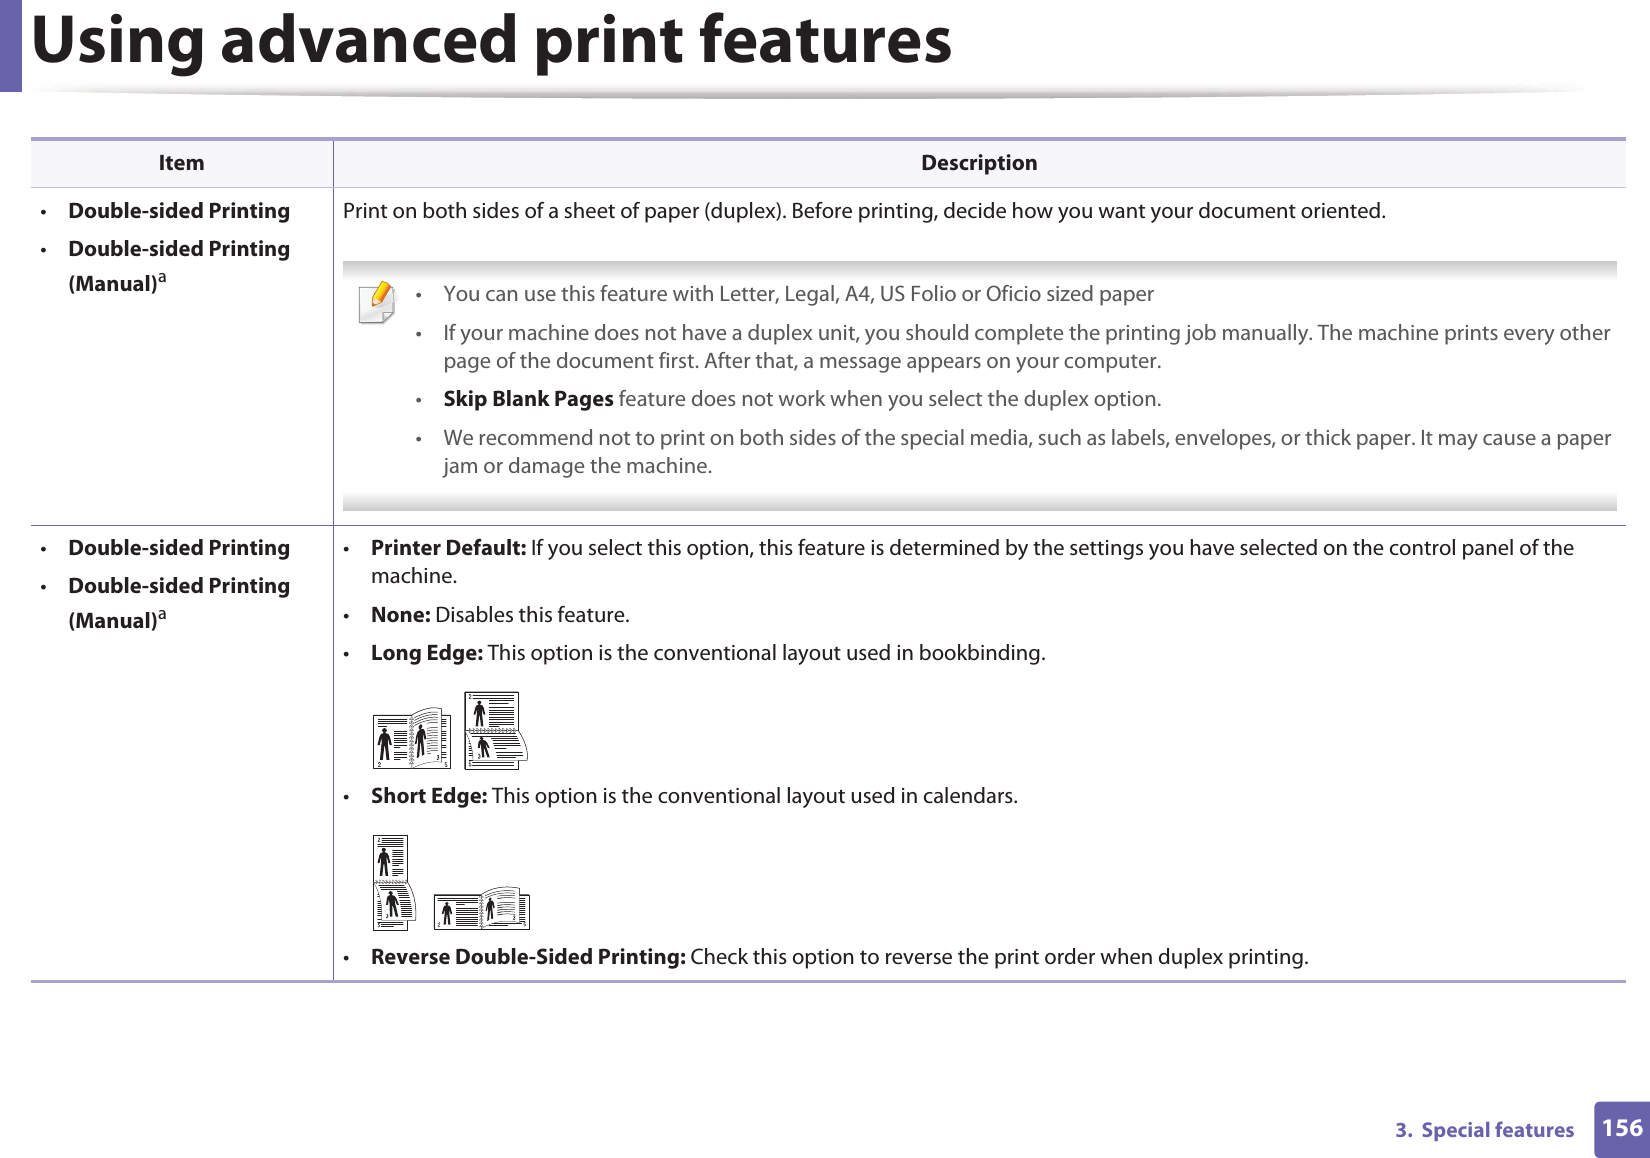 Using advanced print features1563.  Special features•Double-sided Printing•Double-sided Printing (Manual)aPrint on both sides of a sheet of paper (duplex). Before printing, decide how you want your document oriented.  • You can use this feature with Letter, Legal, A4, US Folio or Oficio sized paper • If your machine does not have a duplex unit, you should complete the printing job manually. The machine prints every other page of the document first. After that, a message appears on your computer.•Skip Blank Pages feature does not work when you select the duplex option.• We recommend not to print on both sides of the special media, such as labels, envelopes, or thick paper. It may cause a paper jam or damage the machine. •Double-sided Printing•Double-sided Printing (Manual)a•Printer Default: If you select this option, this feature is determined by the settings you have selected on the control panel of the machine. •None: Disables this feature.•Long Edge: This option is the conventional layout used in bookbinding.•Short Edge: This option is the conventional layout used in calendars.•Reverse Double-Sided Printing: Check this option to reverse the print order when duplex printing.Item Description